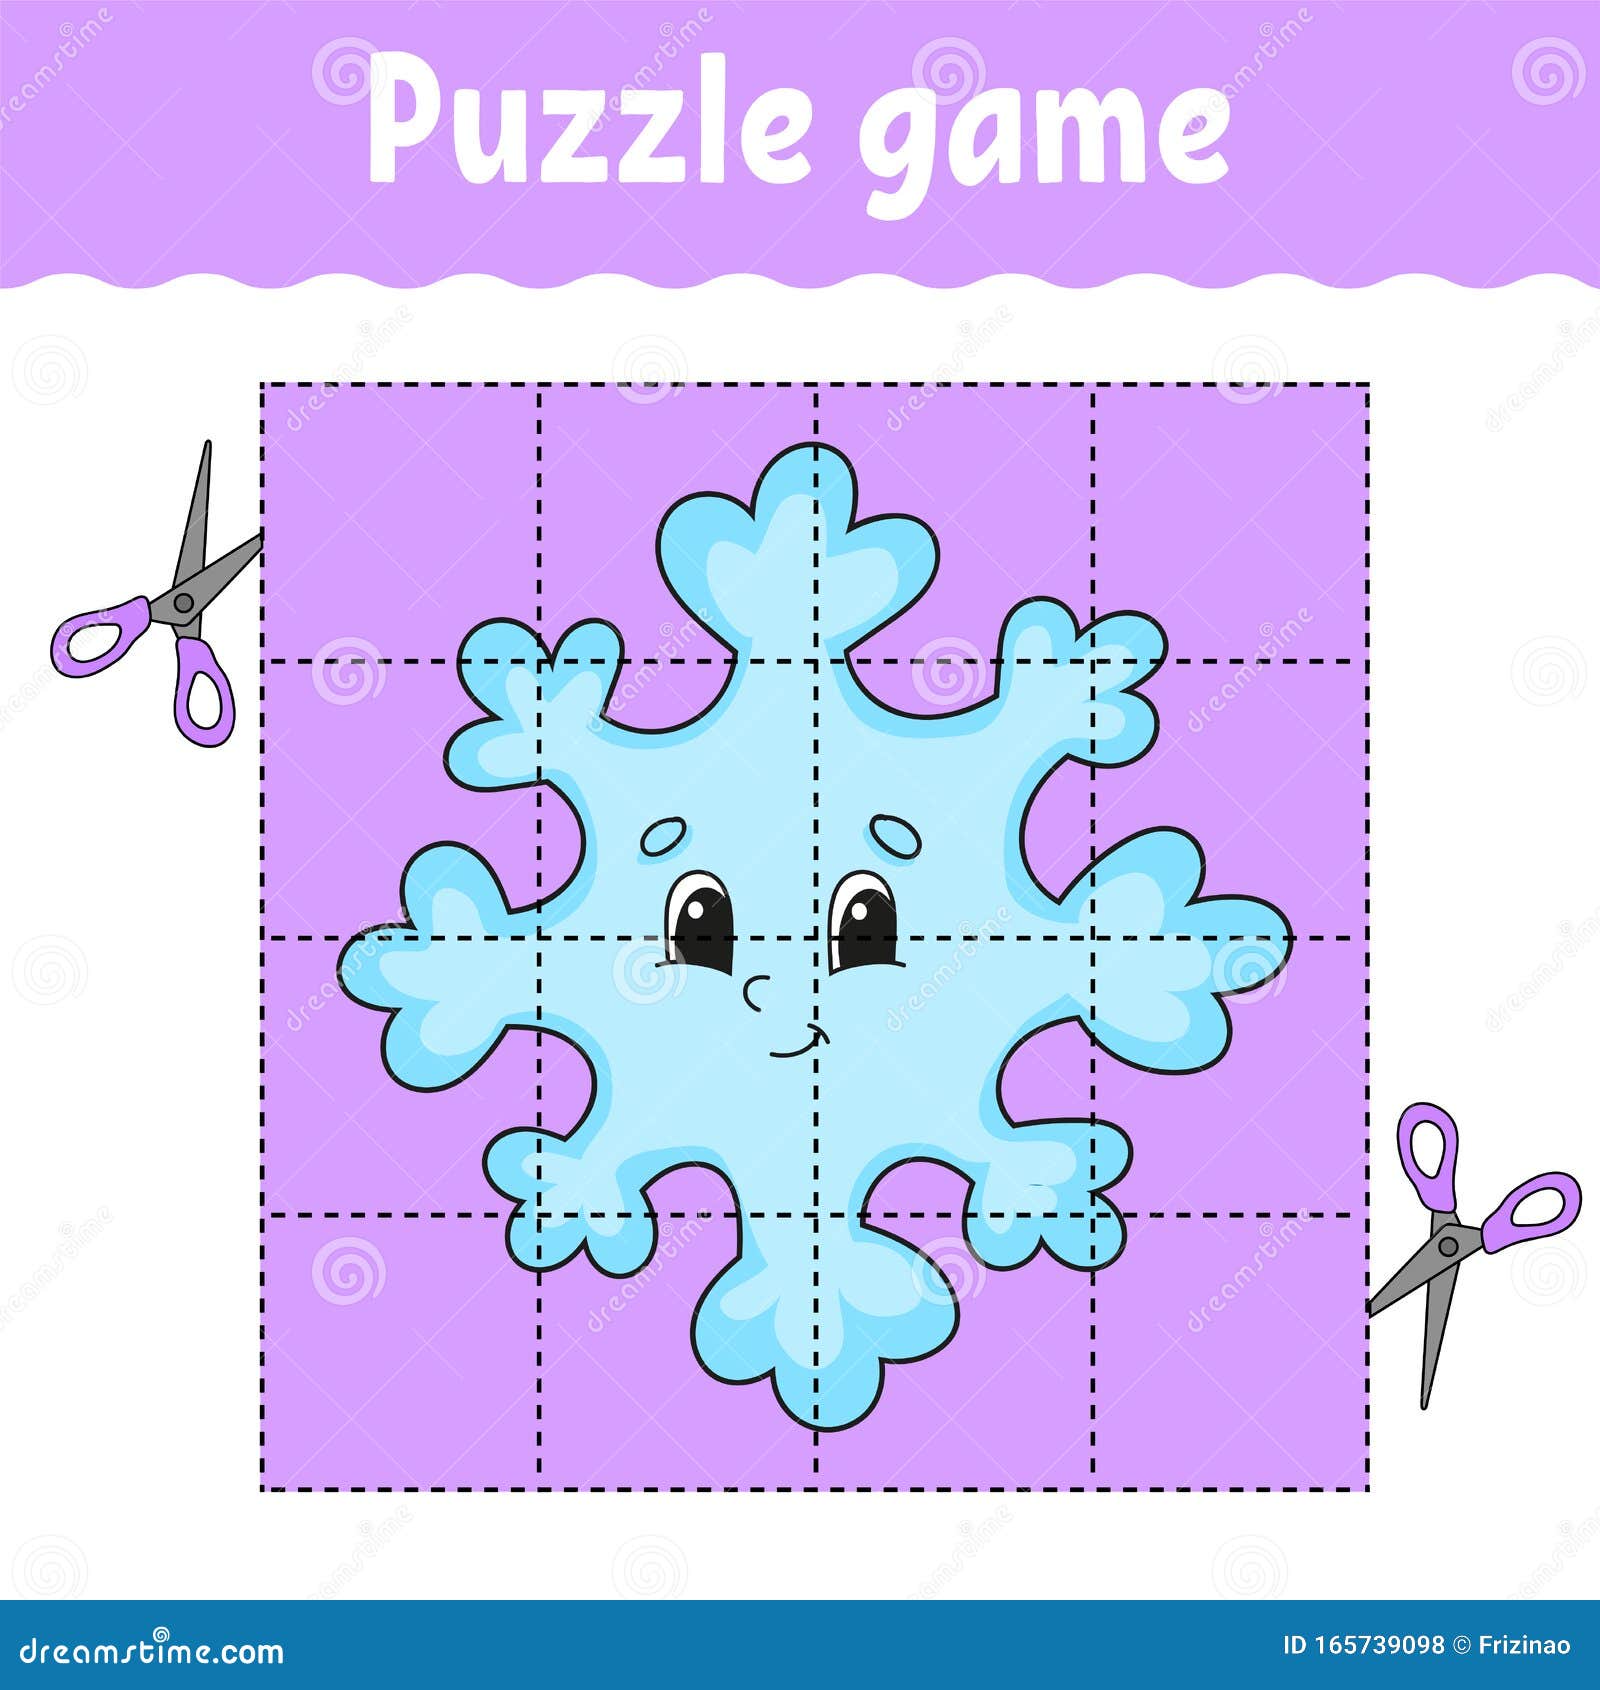 puzzle-game-for-kids-education-developing-worksheet-learning-game-for